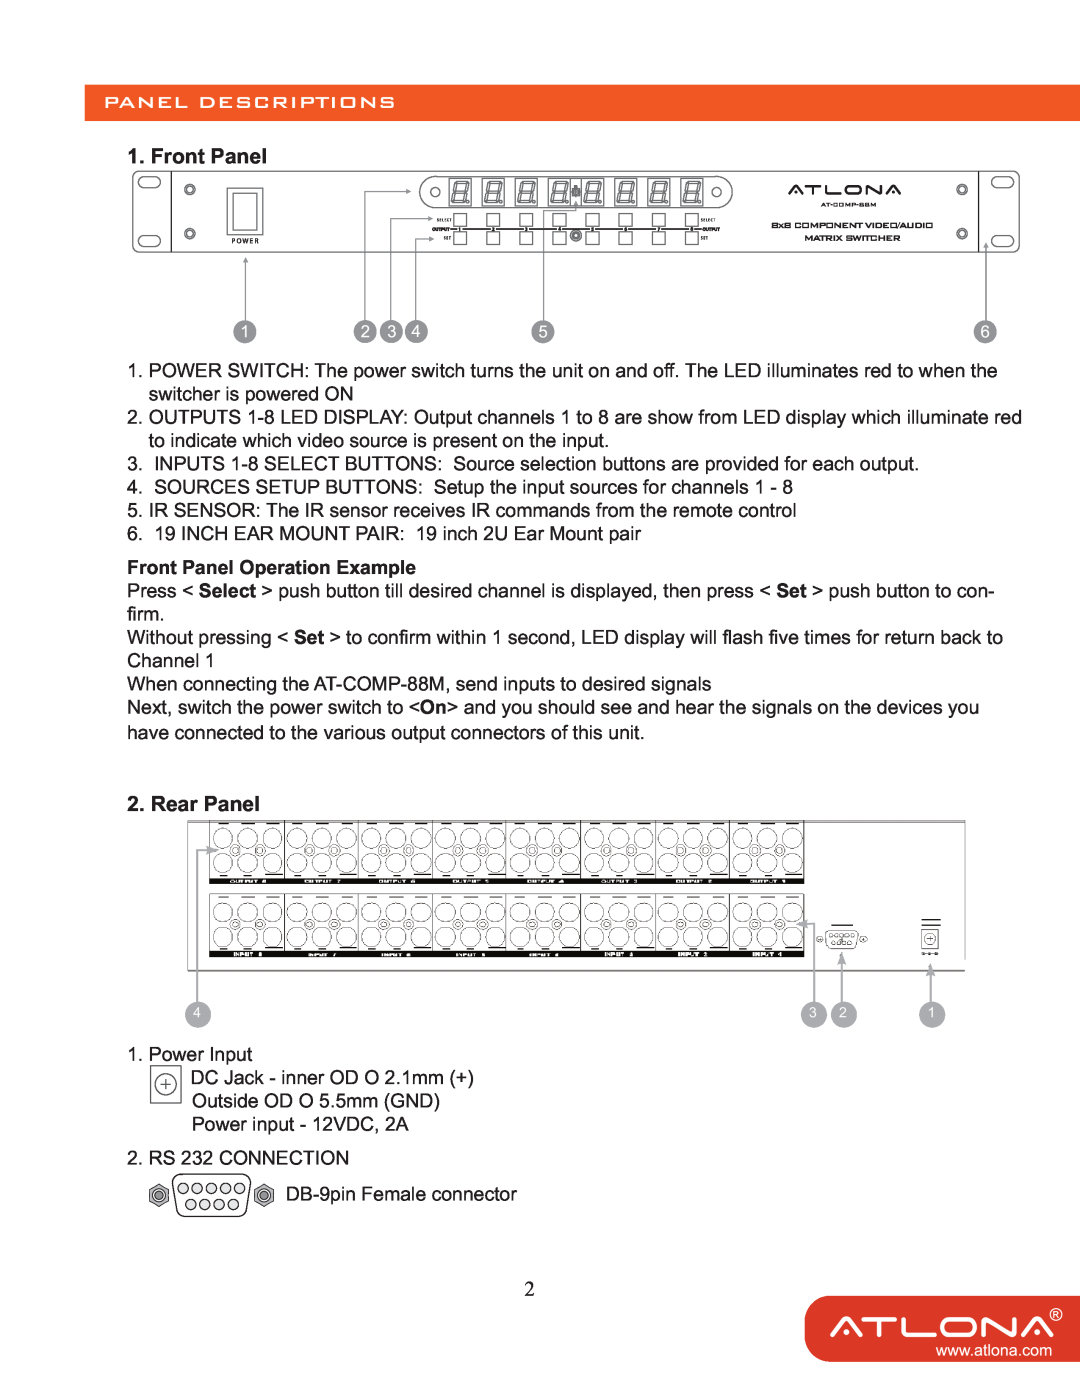 Atlona AT-COMP-88M user manual Panel Descriptions, Rear Panel, Front Panel Operation Example 